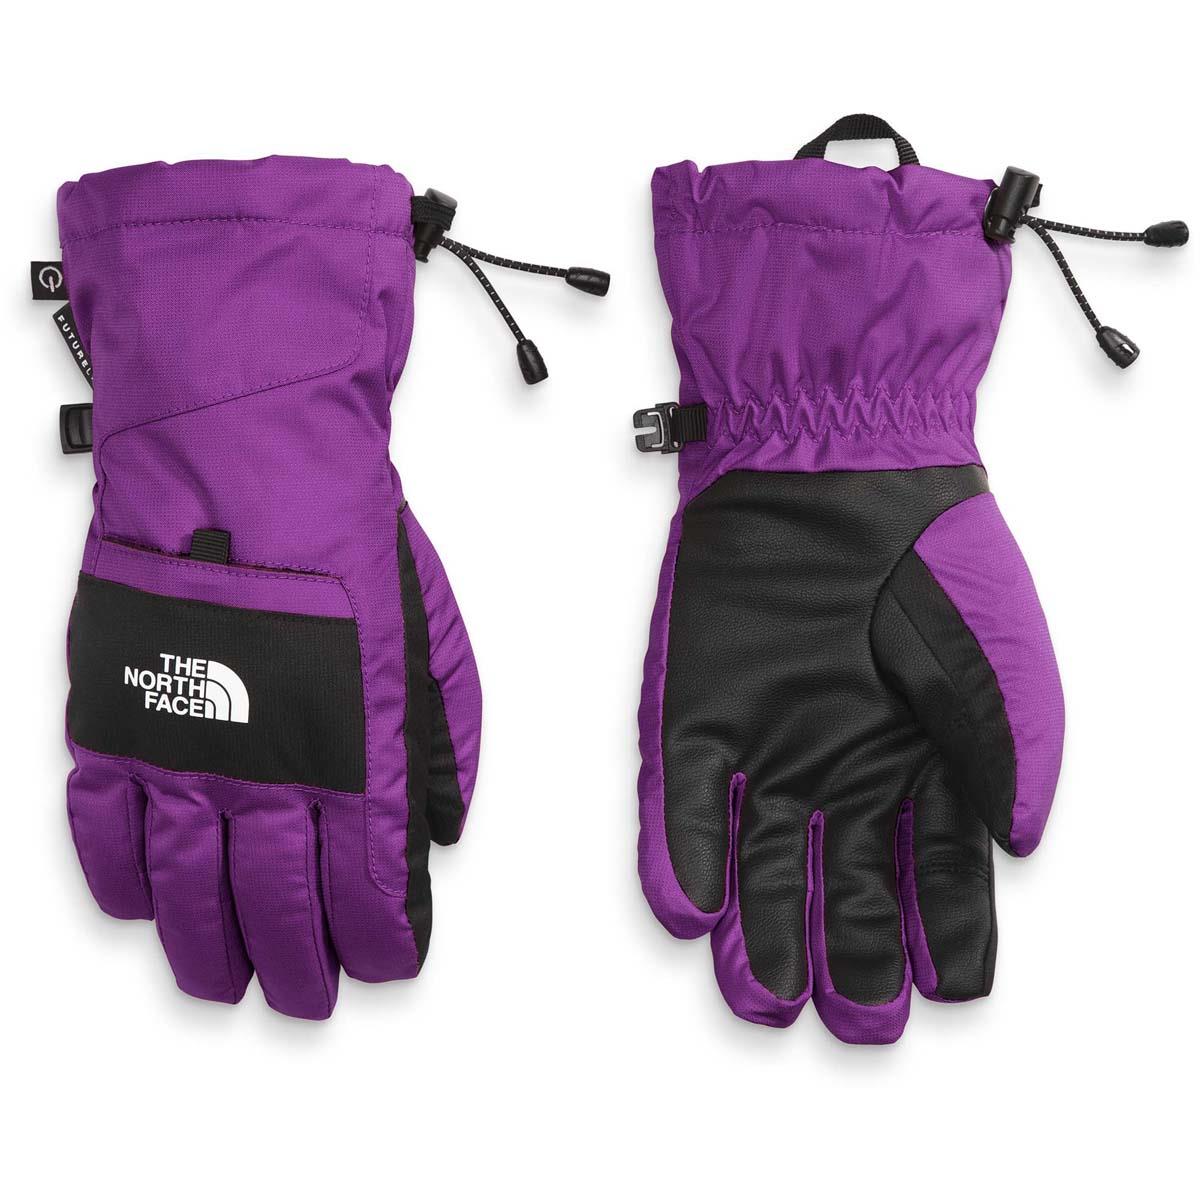 - The FUTURELIGHT Face Youth Etip Glove Montana North NF0A4SGR